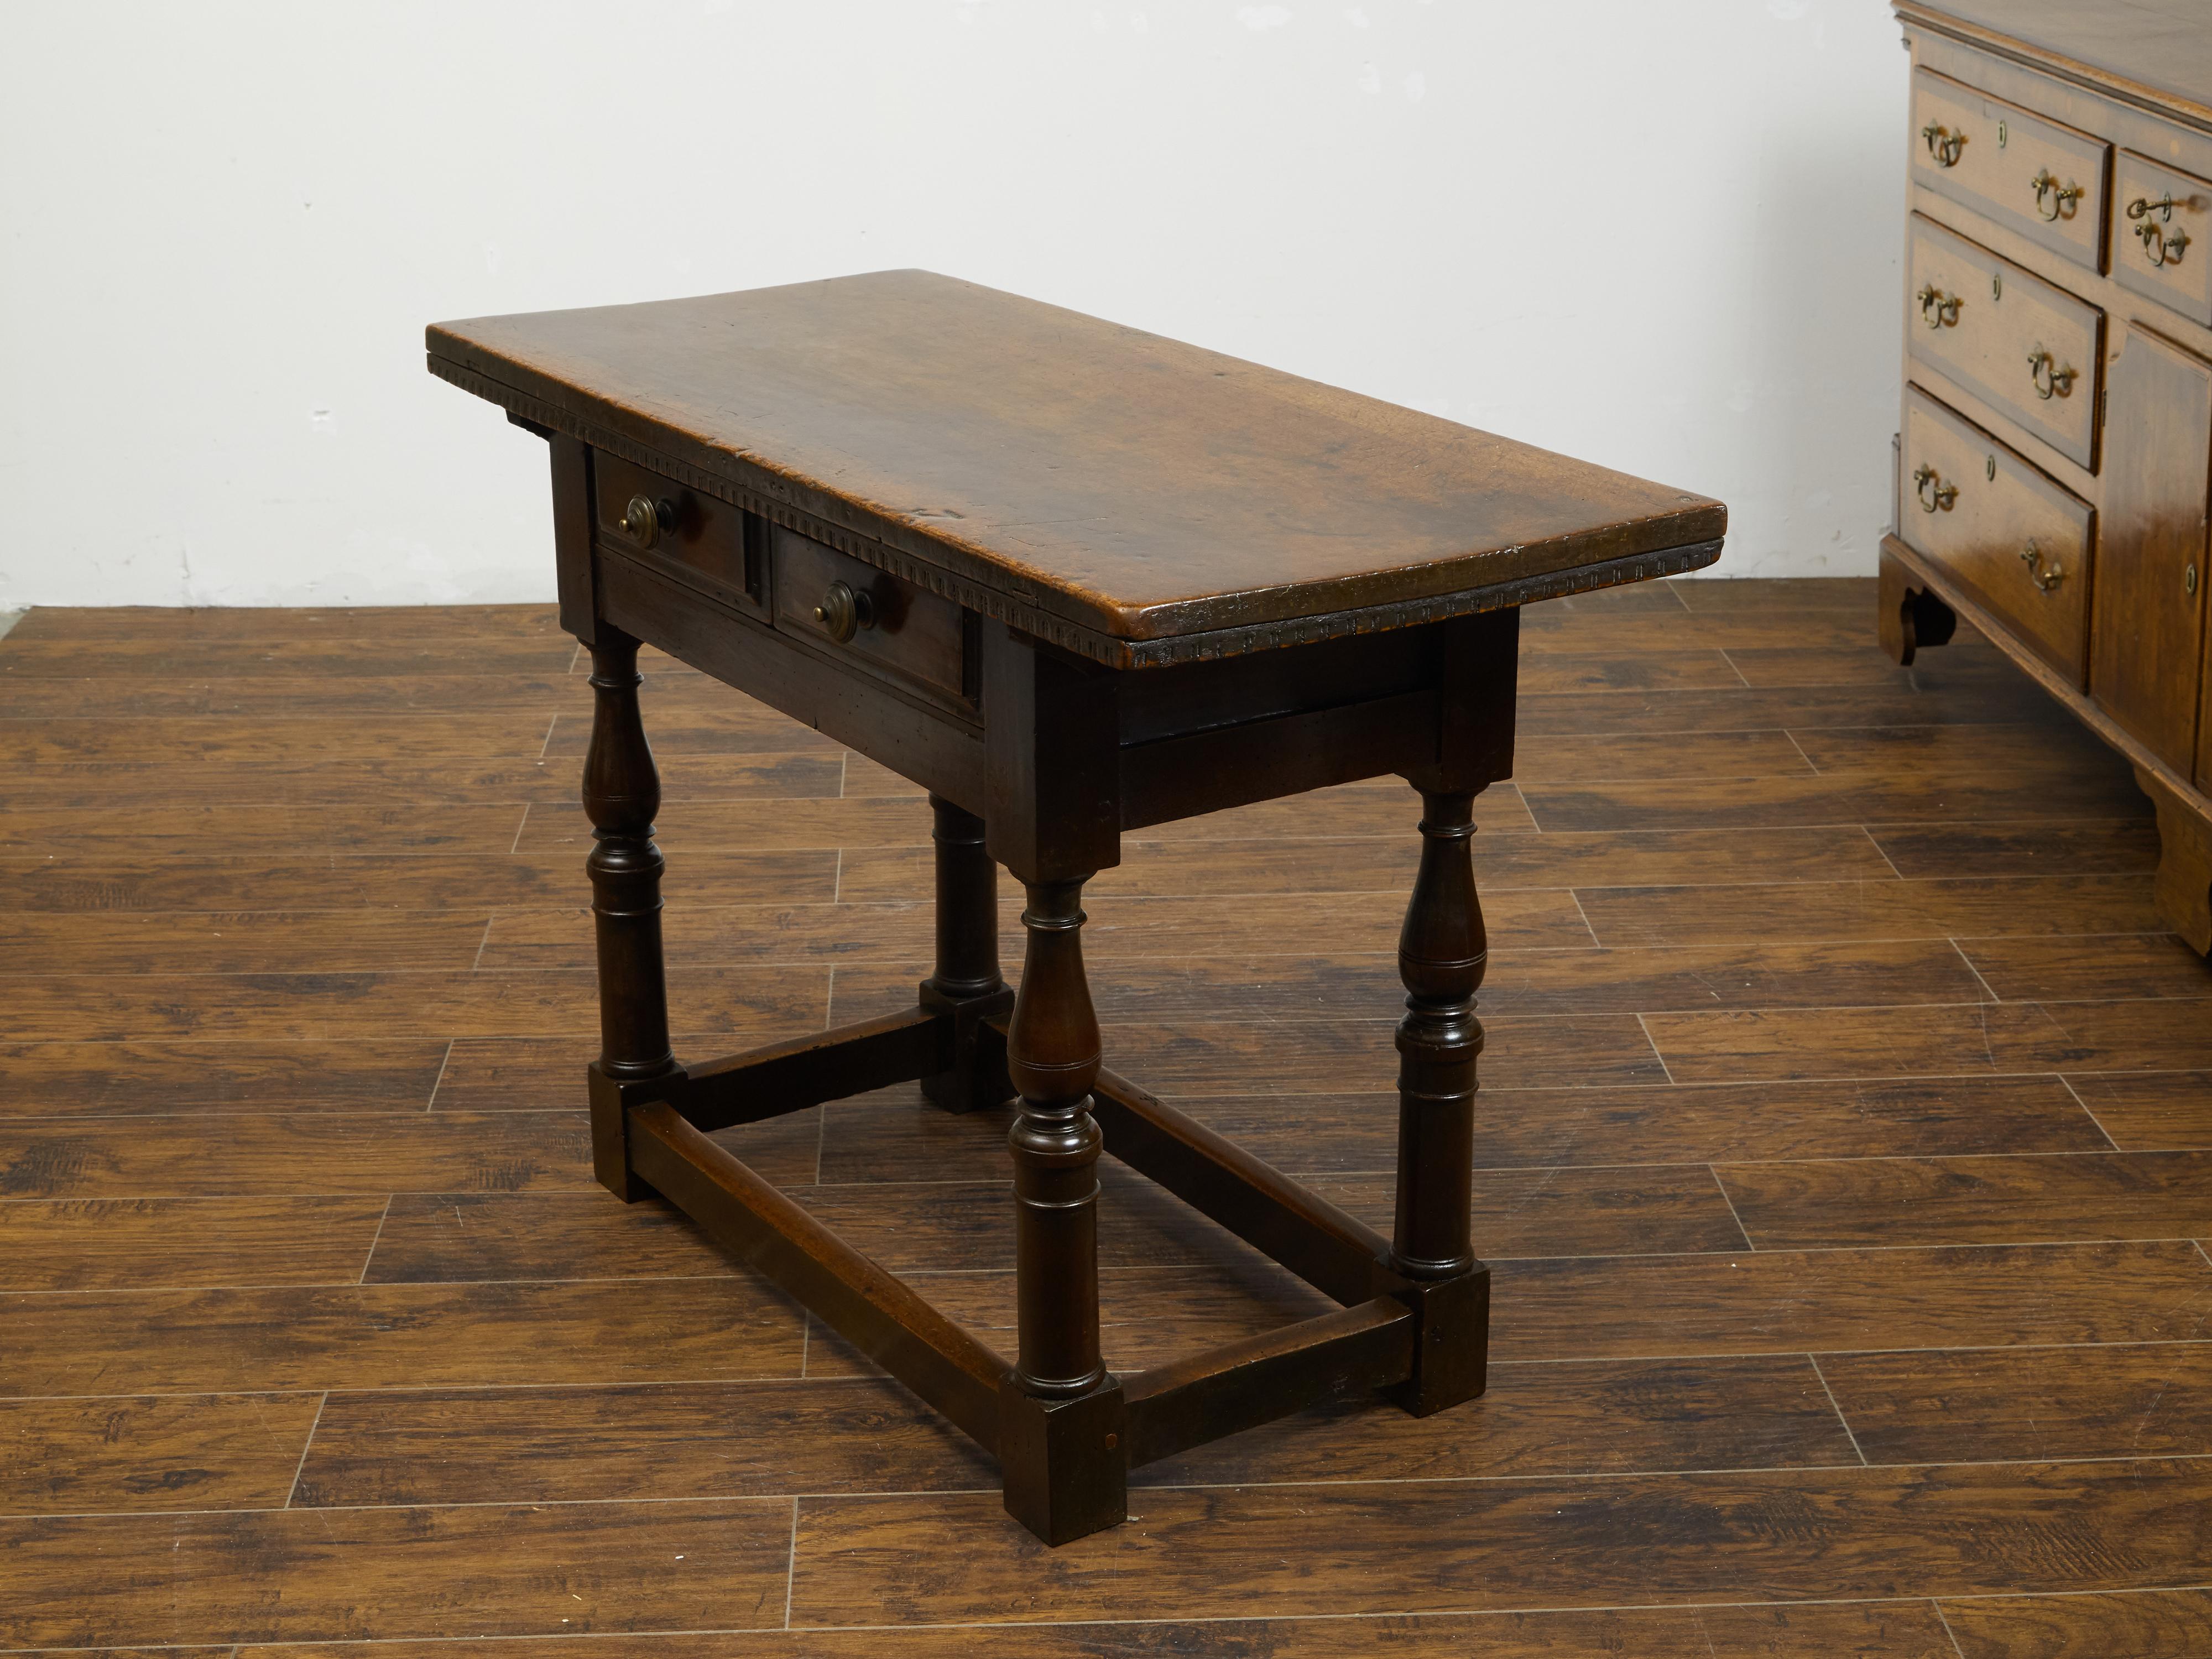 An Italian walnut console table from the early 19th century, with two drawers, turned legs and dentil molding. Created in Italy during the early years of the 19th century, this console table features a rectangular top adorned with a dentil molding,